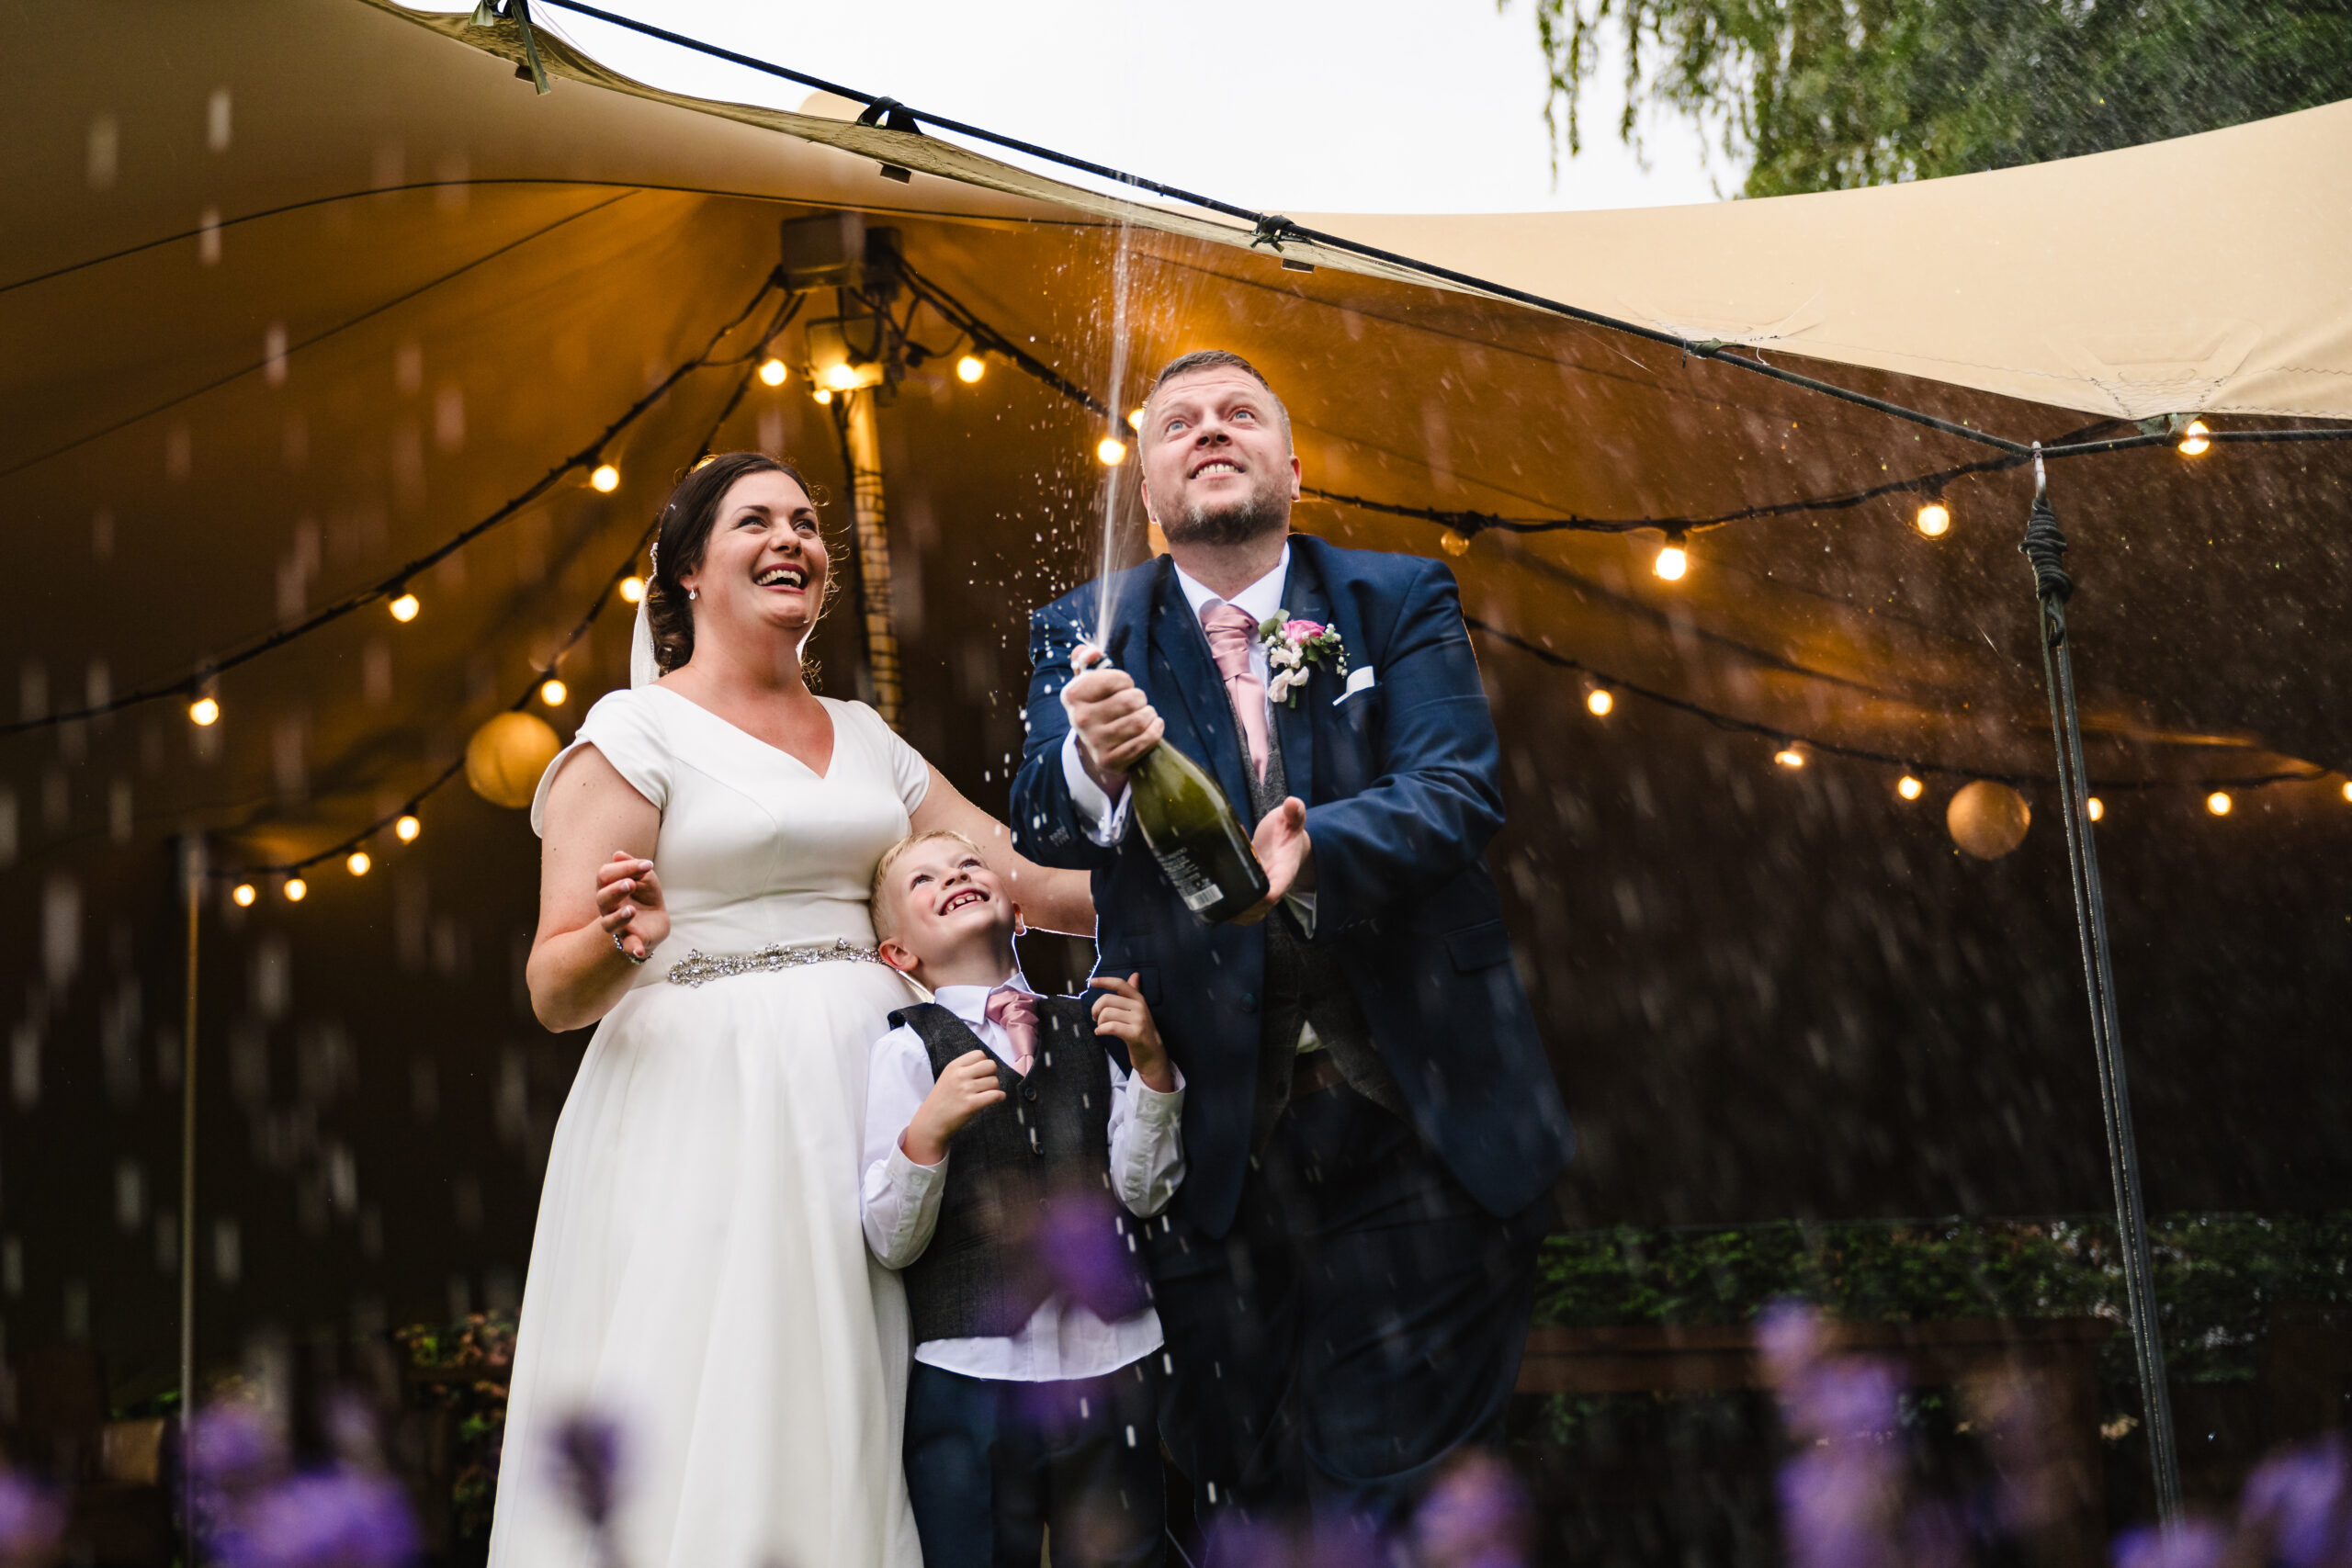 Couple popping champagne on their wedding day at chequers inn woolsthorpe